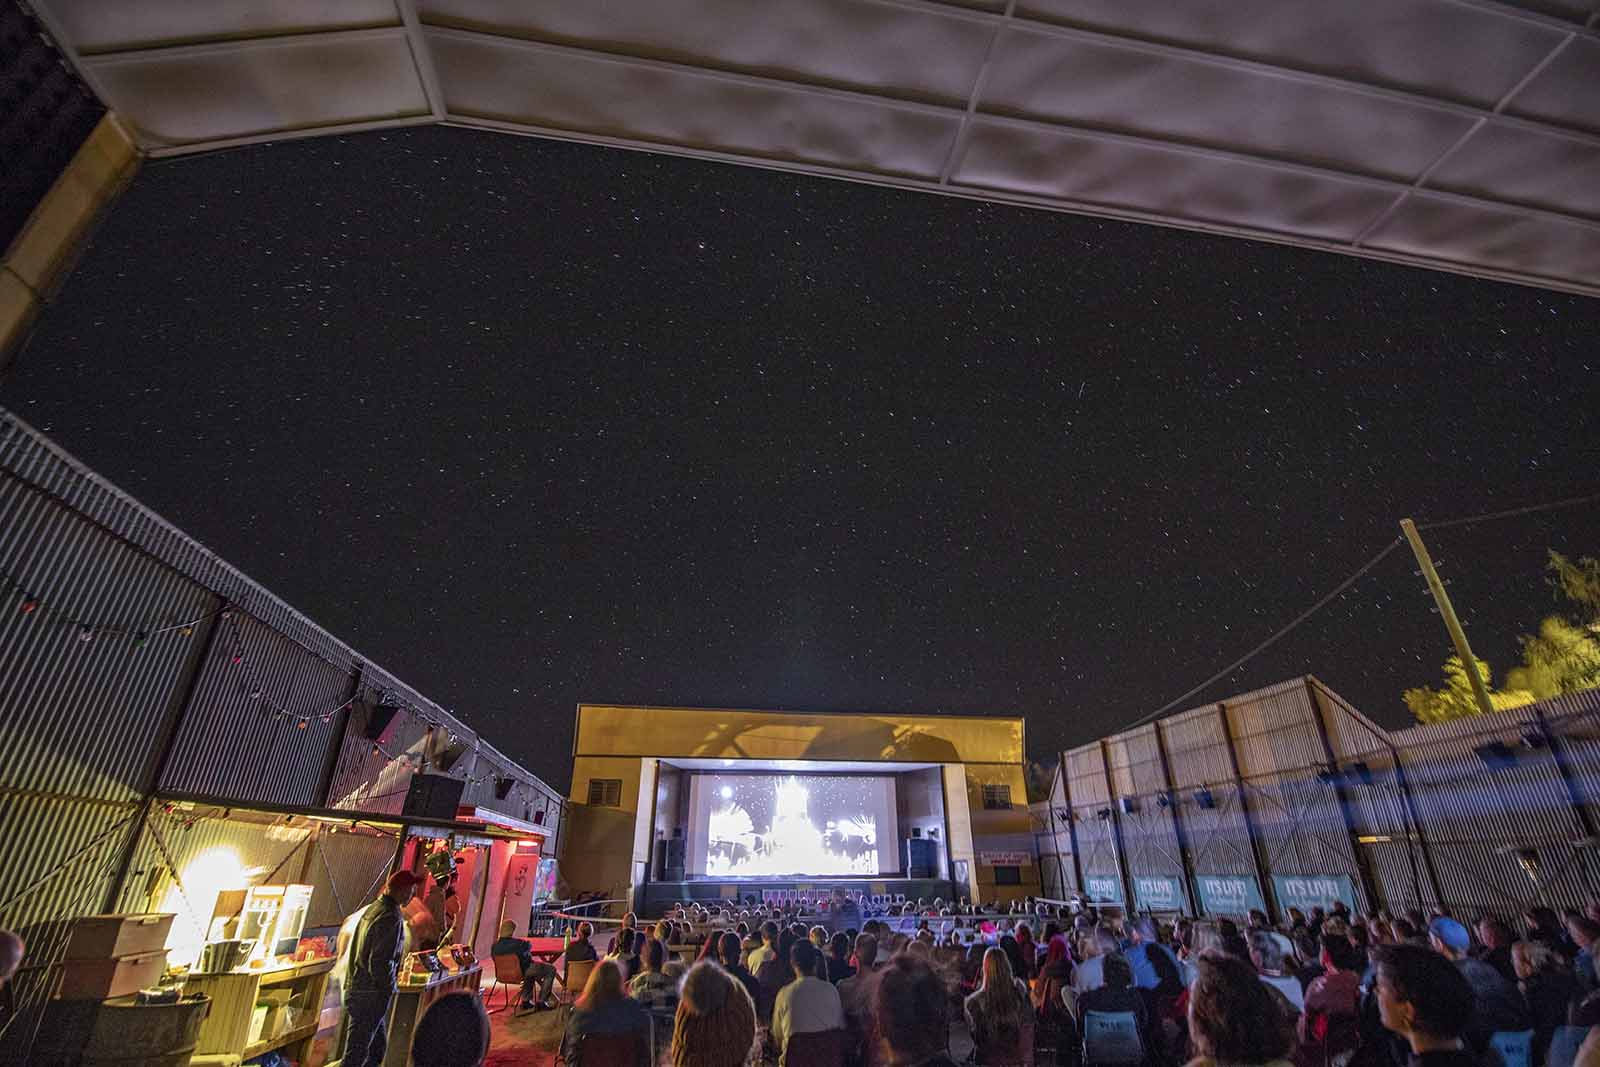 Open-air cinema | Everything you need to know about Vision Splendid Outback Film Festival